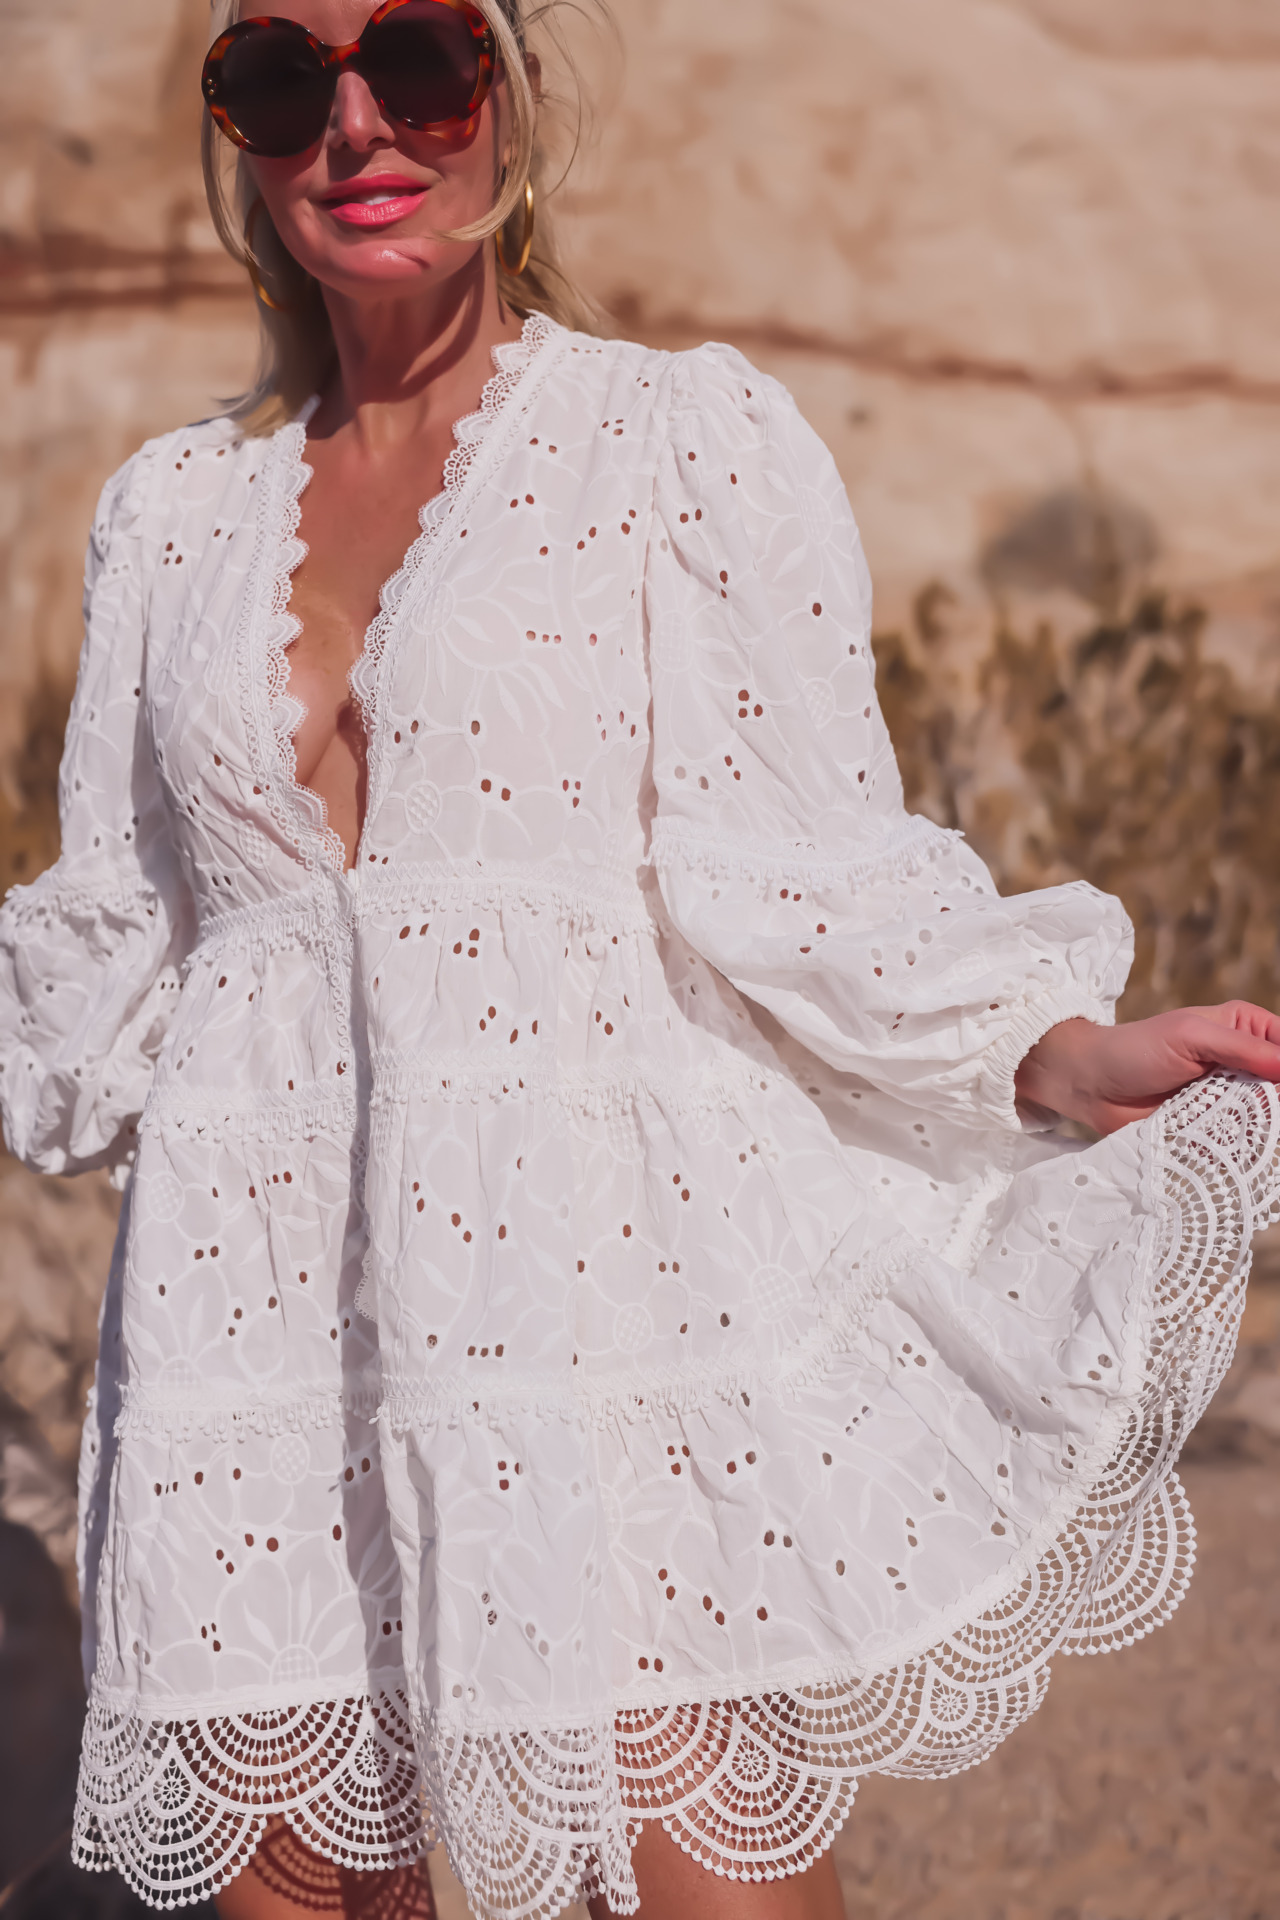 white dresses, resort white dresses, best white dresses, white dresses over 40, what to wear on vacation, summer white dresses, spring white dresses, erin busbee, busbee style, waimari white mini kimono dress, see by chloe wedges, dean davidson gold dune hoops, gucci round sunglasses